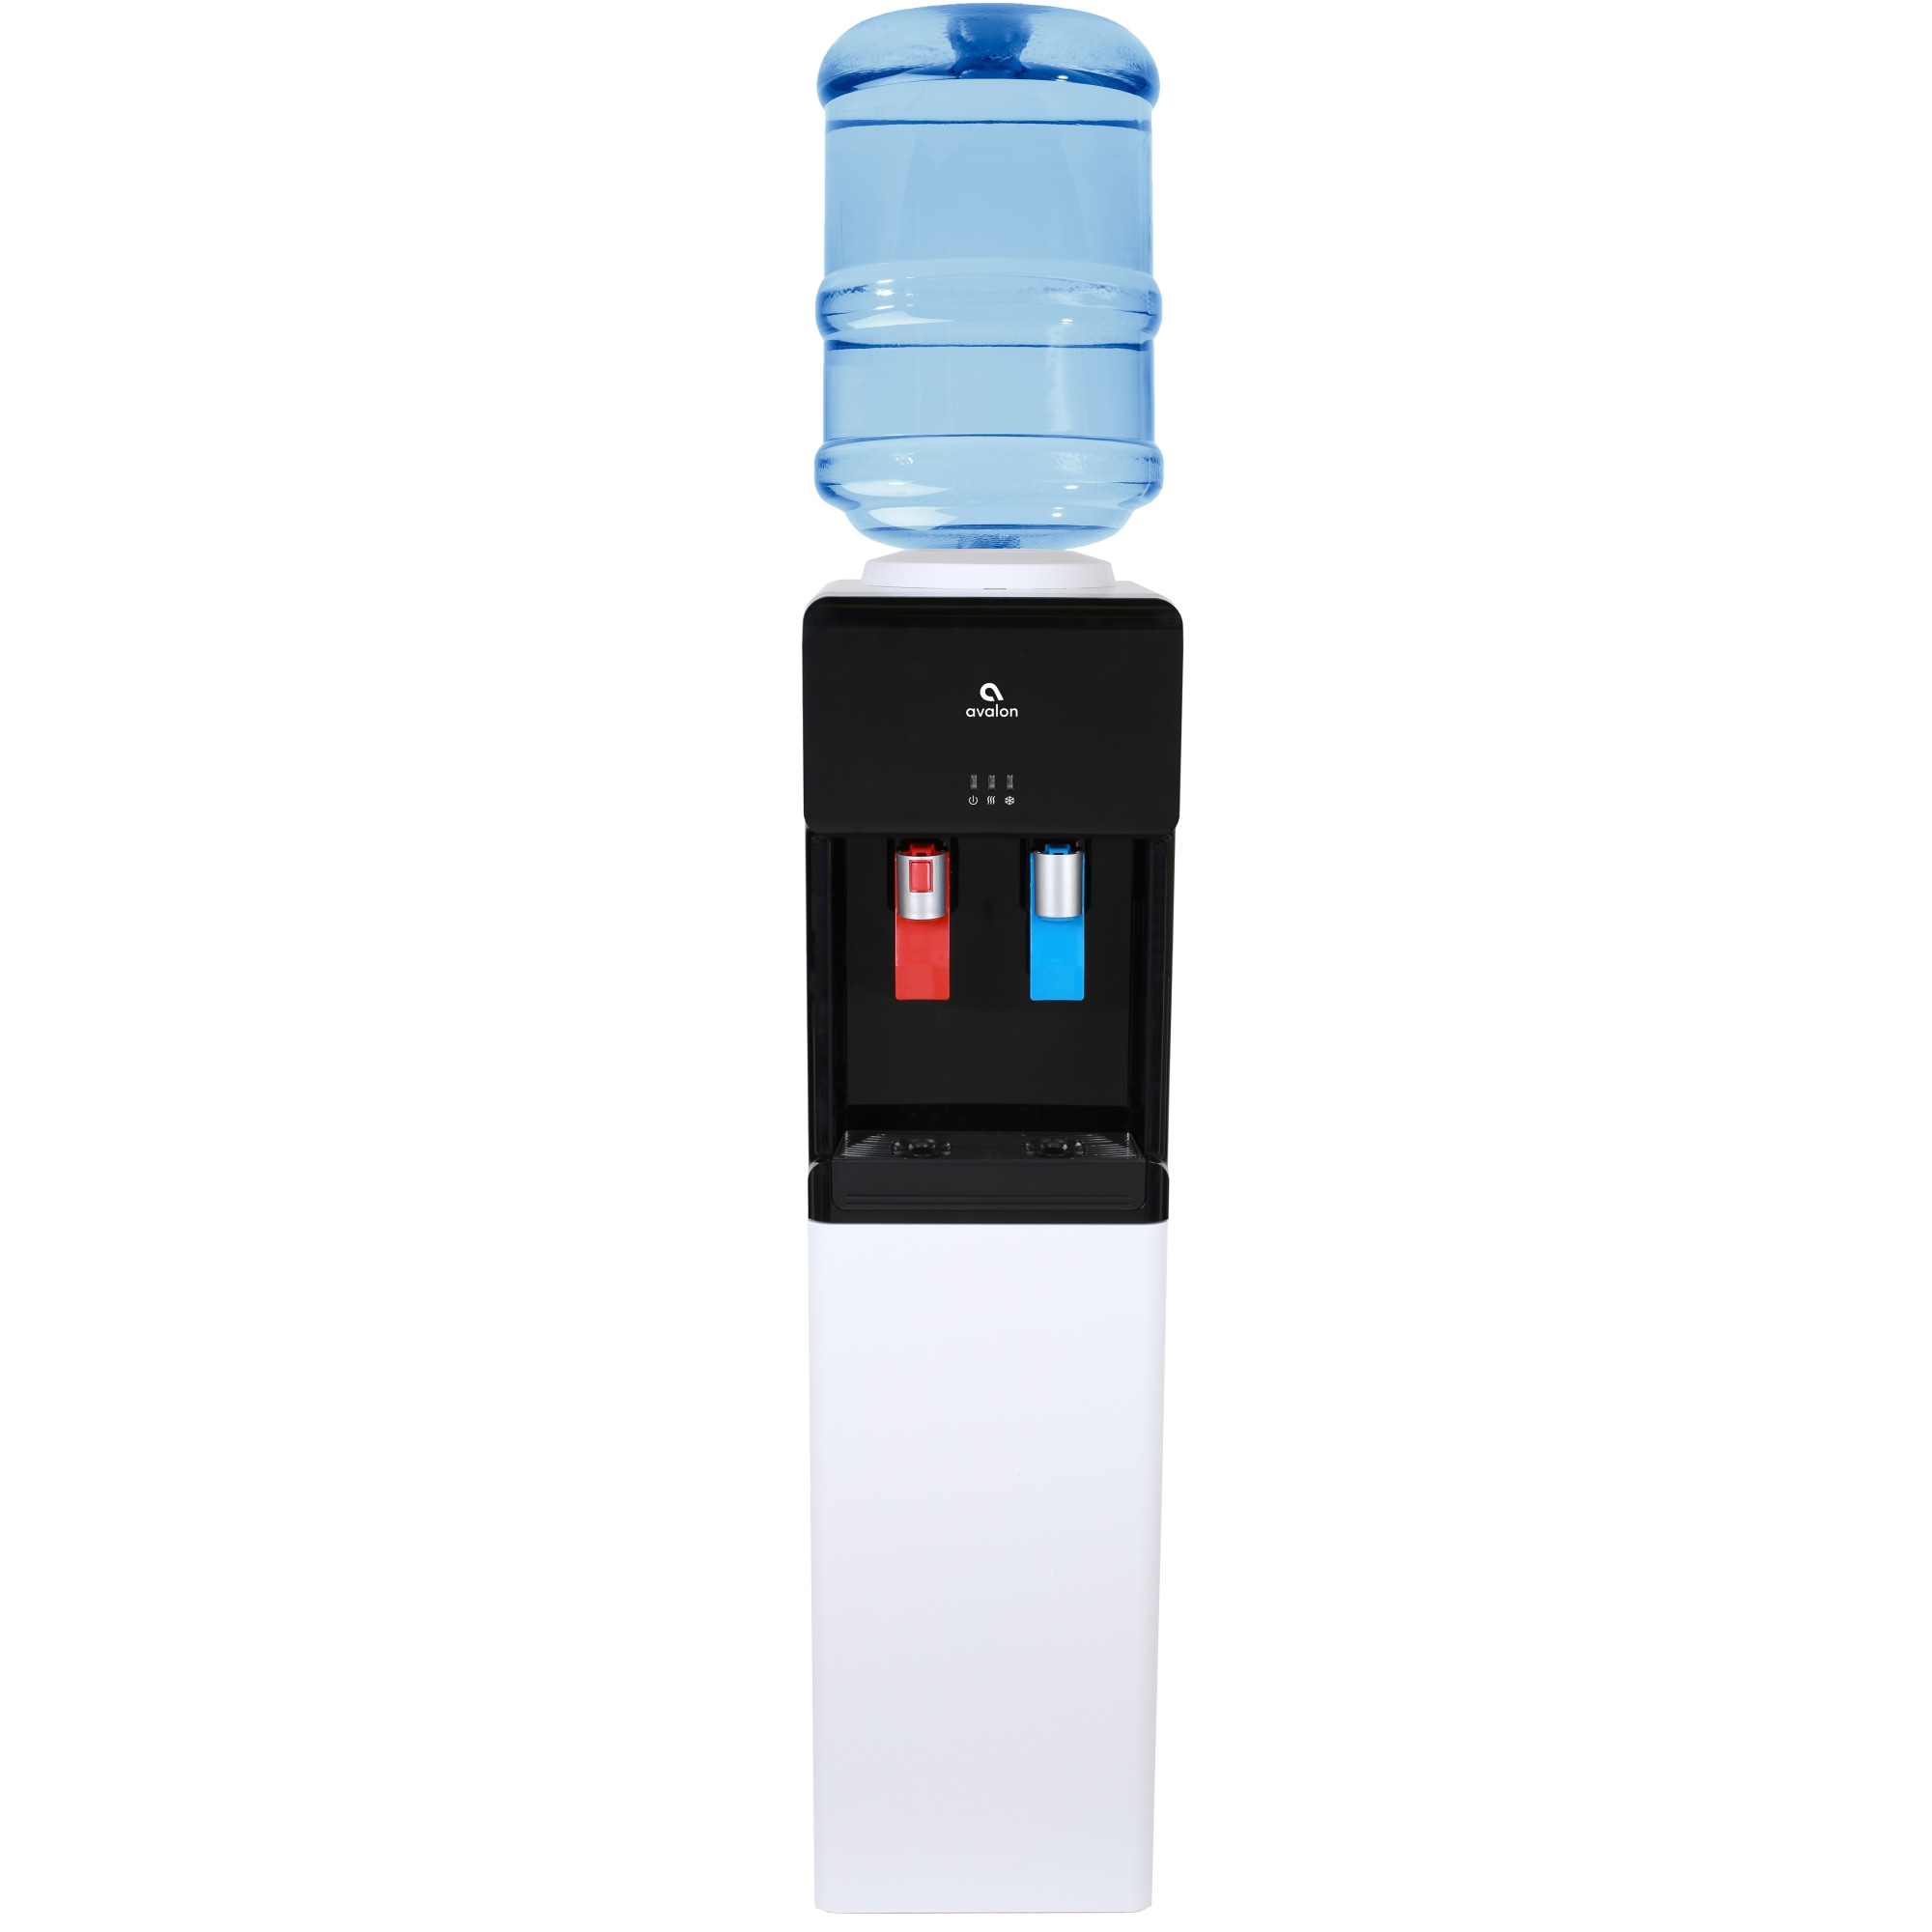 Avalon Top Loading Water Dispenser - Hot & Cold Water Temperature, Child Safety Lock, Black - image 1 of 3